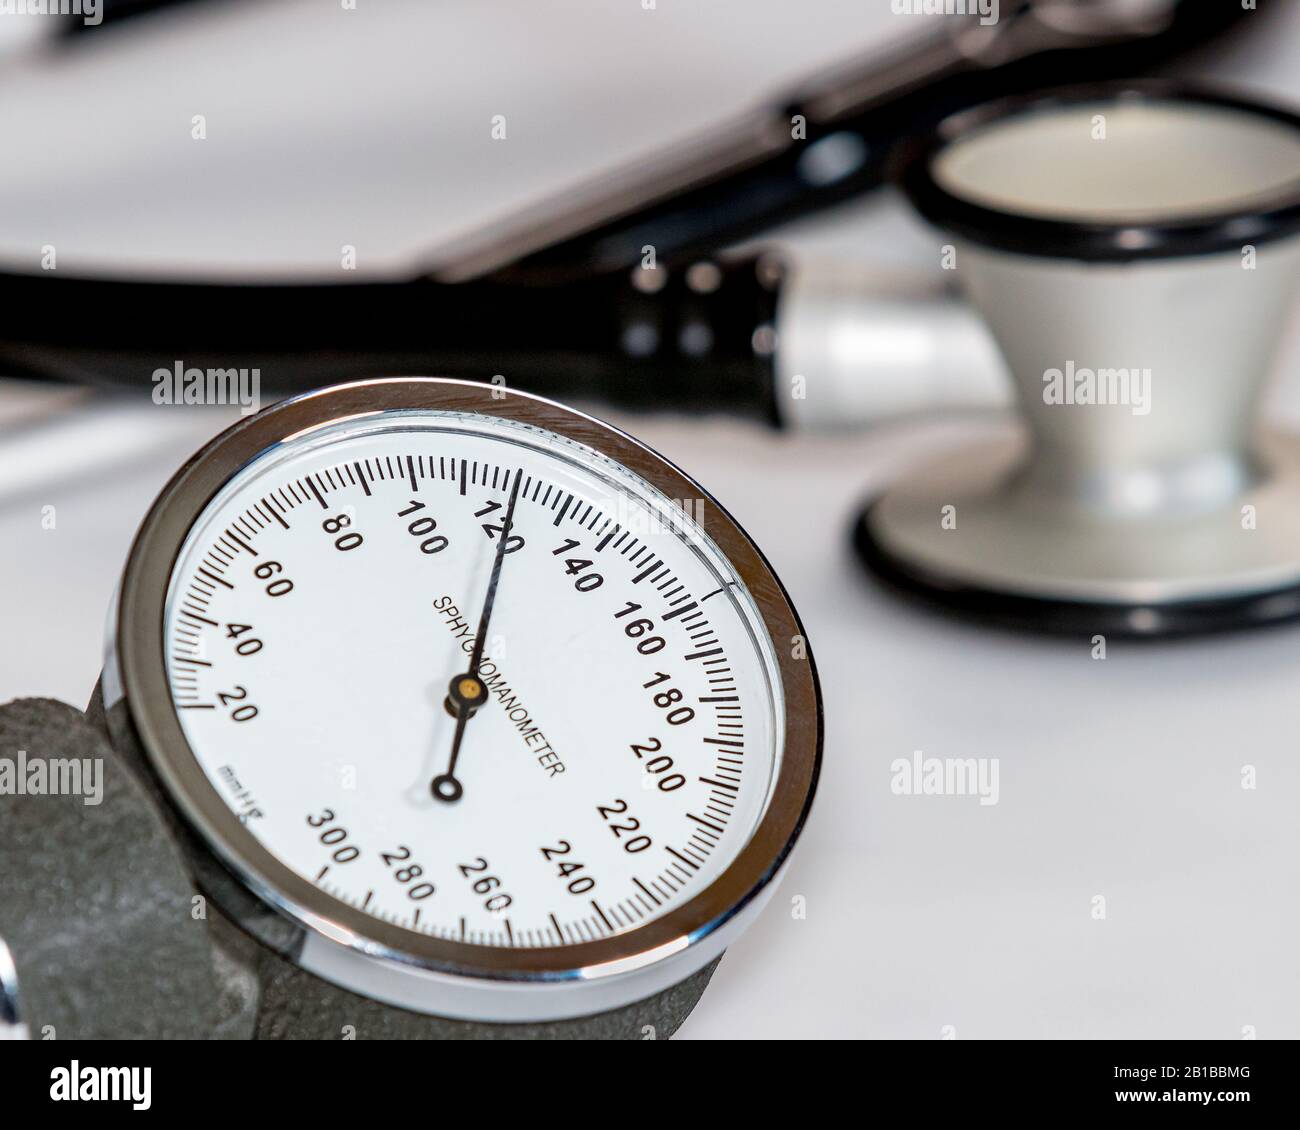 Closeup of blood pressure cuff gauge with normal systolic reading of 120 mmHg. Stethoscope in background. Stock Photo